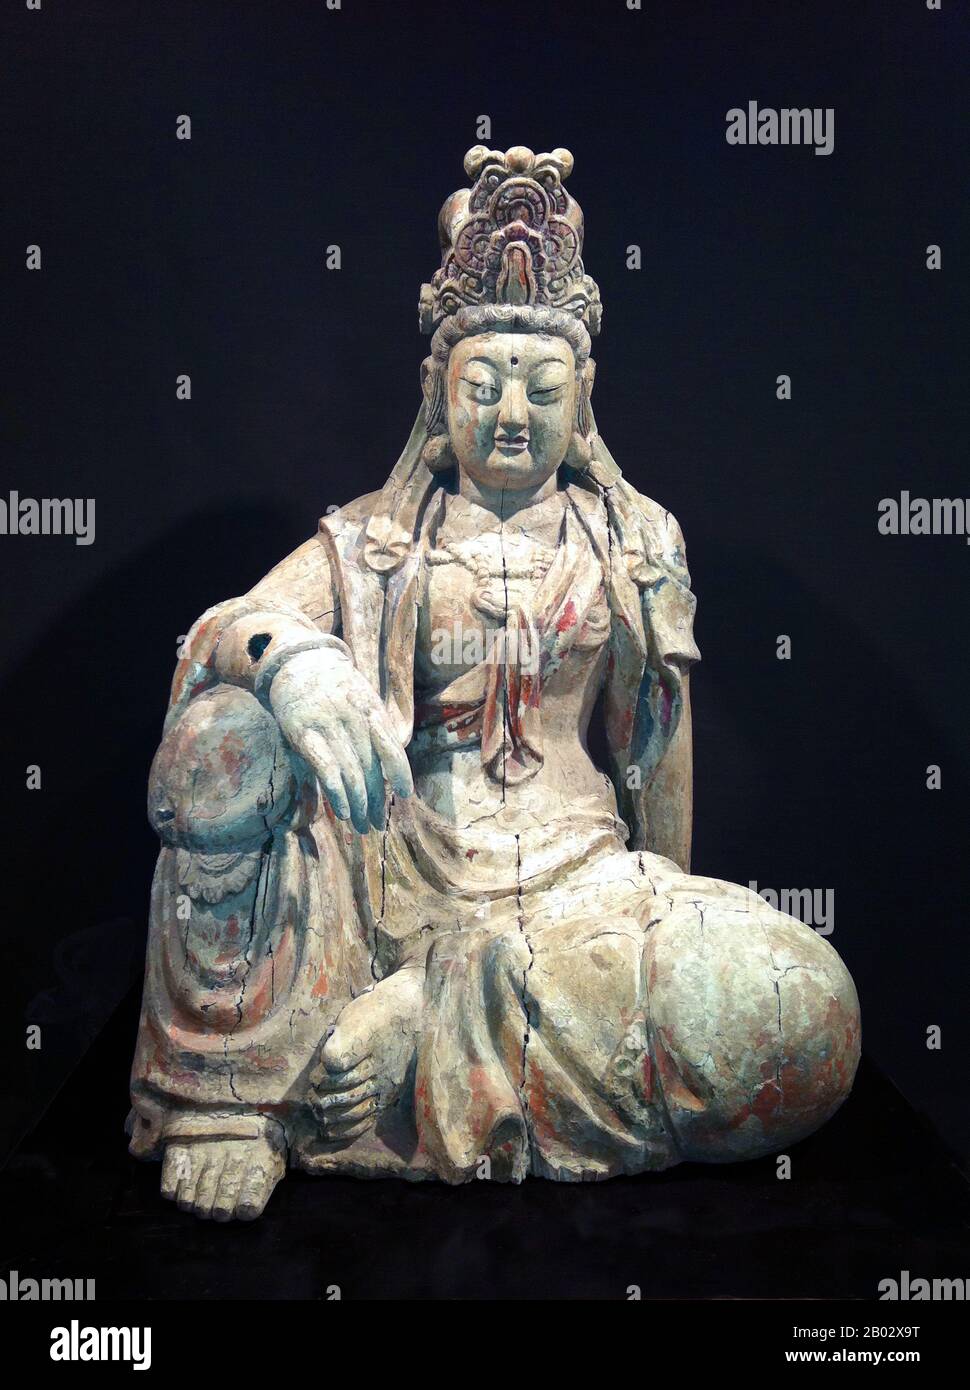 China: Wooden image of Guanyin, the Goddess of Mercy. Ming Dynasty (1368-1644). Guanshiyin or Avalokitesvara is the bodhisattva associated with compassion as venerated by East Asian Buddhists, usually as a female. The name Guanyin is short for Guanshiyin which means 'Observing the Sounds (or Cries) of the World'. It is generally accepted (in the Chinese community) that Guanyin originated as the Sanskrit Avalokitesvara, which is her male form. Commonly known in English as the Goddess of Mercy, Guanyin is also revered in Daoism as an Immortal.In Japan, Guanyin is called Kannon. Stock Photo